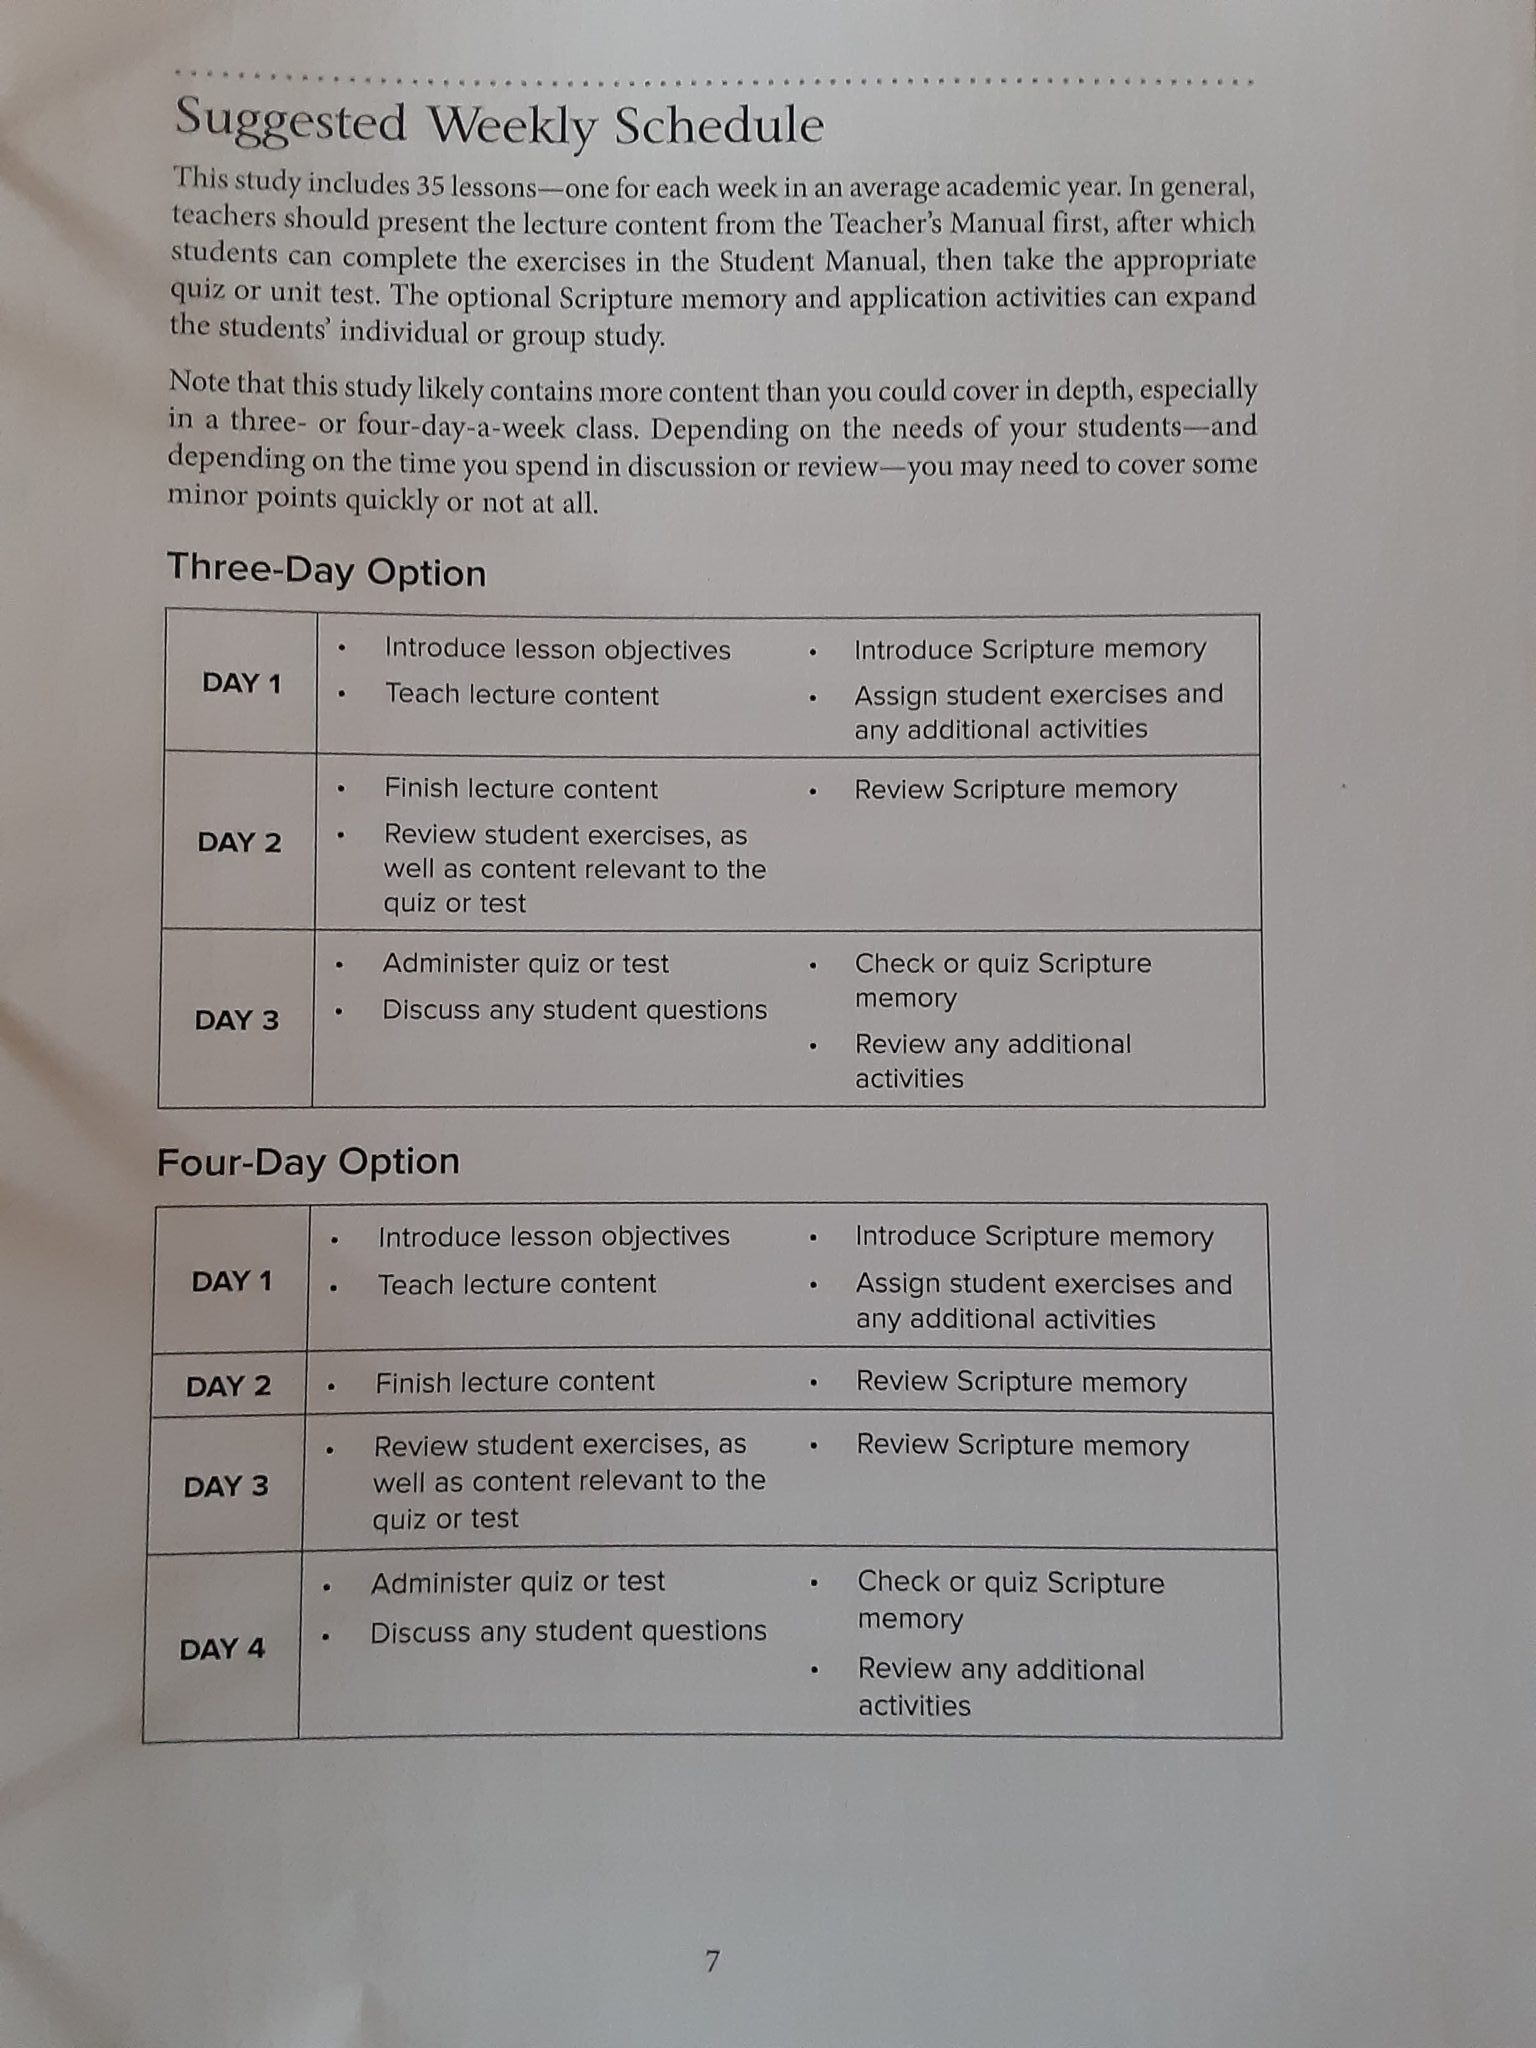 suggested schedule for three-day and four-day Bible Study shown